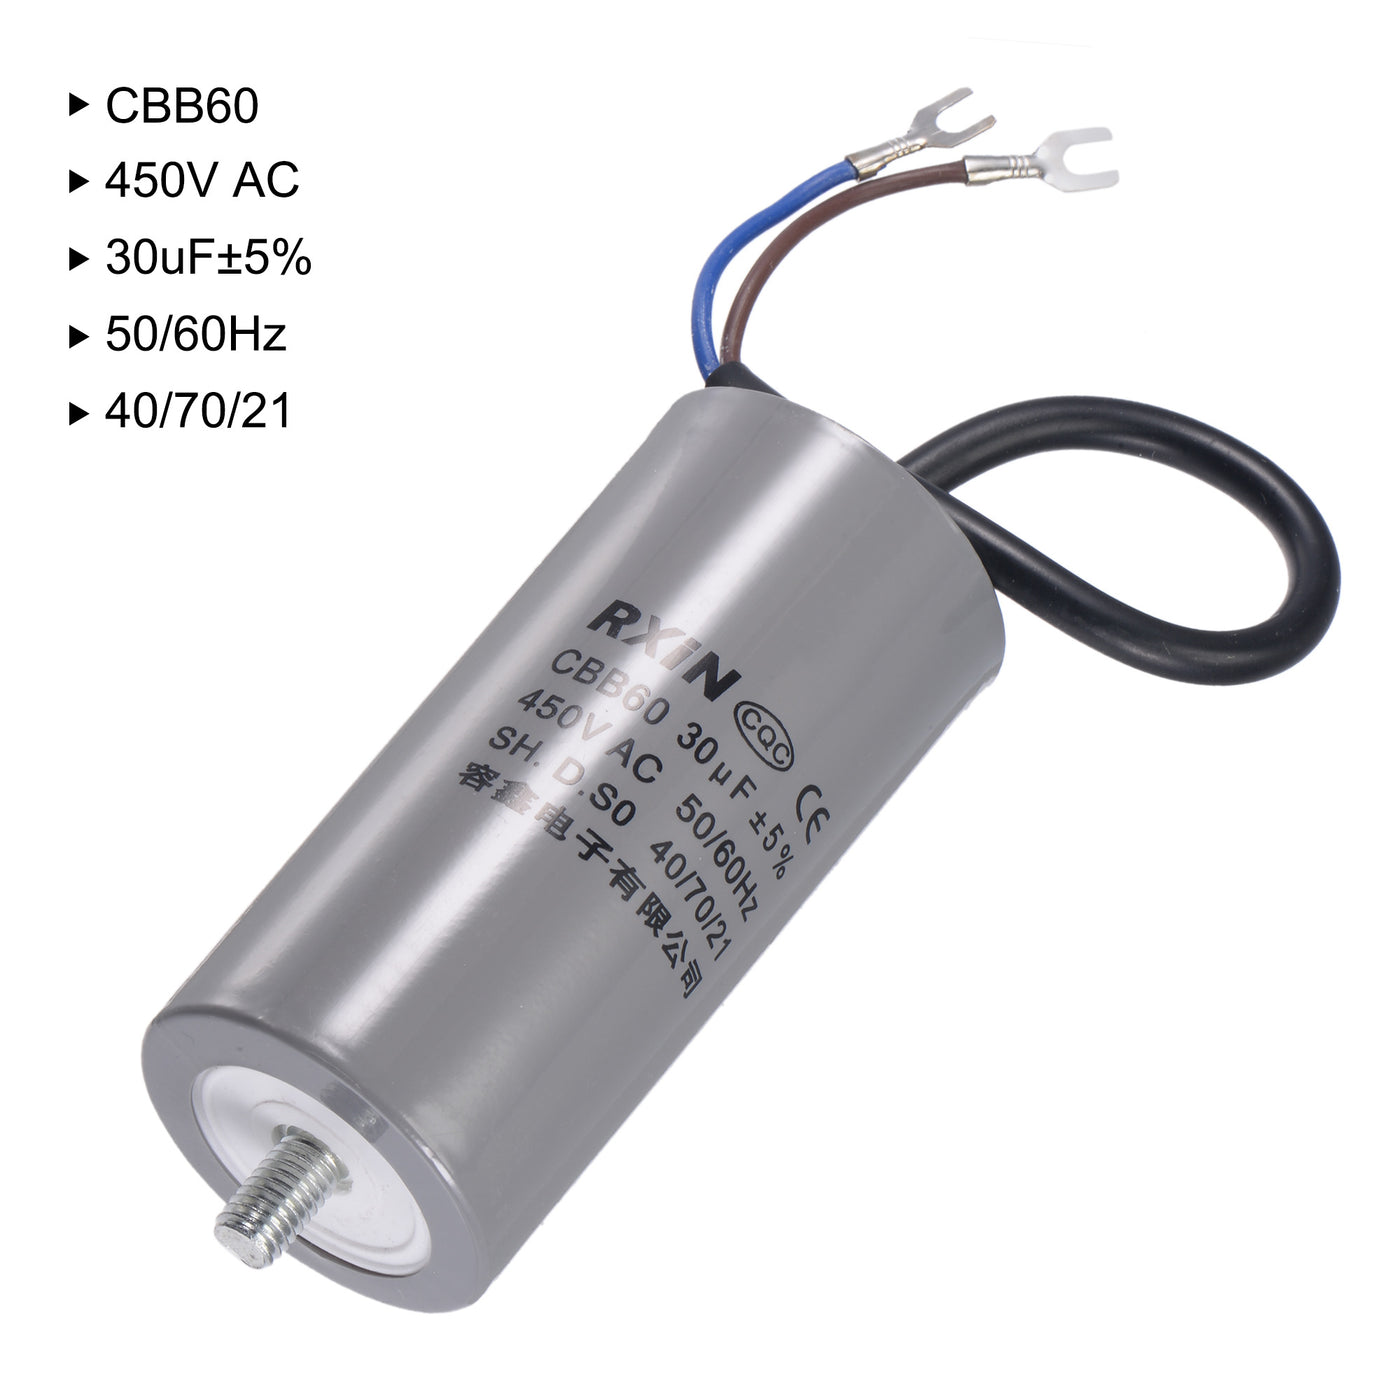 uxcell Uxcell CBB60 Run Capacitor 30uF 450V AC 2 Wires 50/60Hz Cylinder 96x45mm with Terminal, M8 Fixing Stud for Air Compressor Water Pump Motor